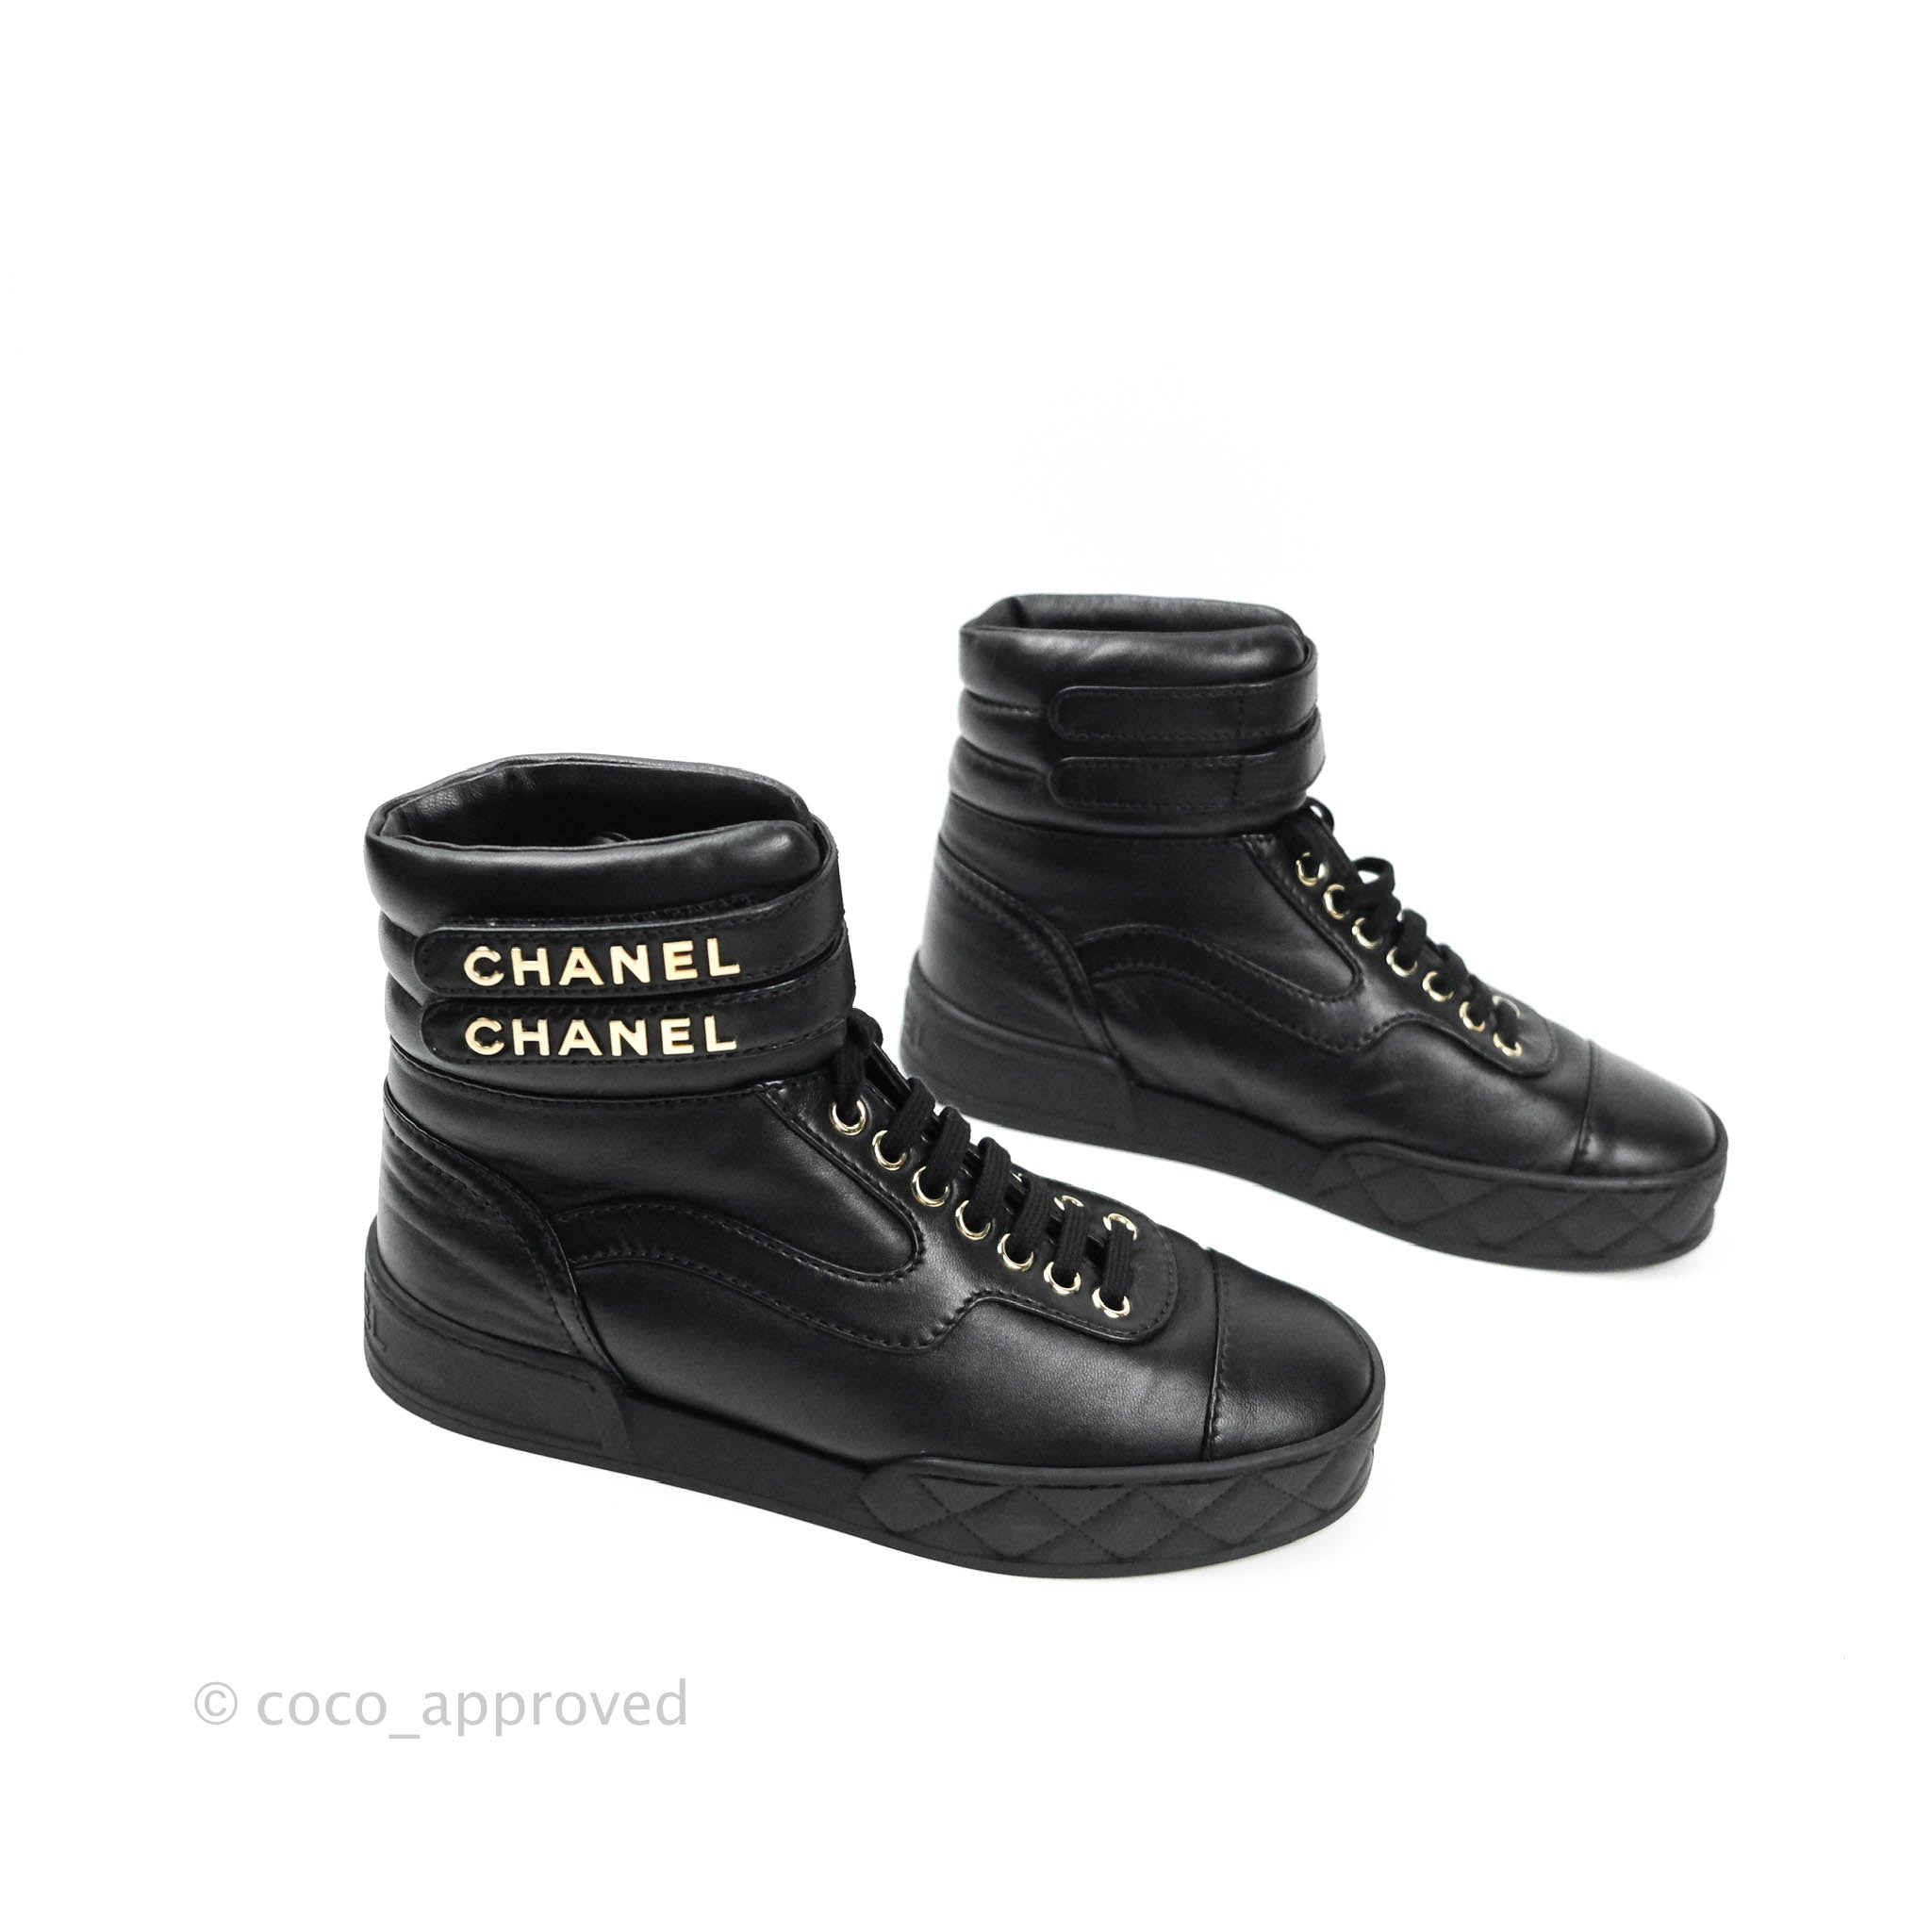 Chanel 2019/20AW Ankle Strap Sneakers – Coco Approved